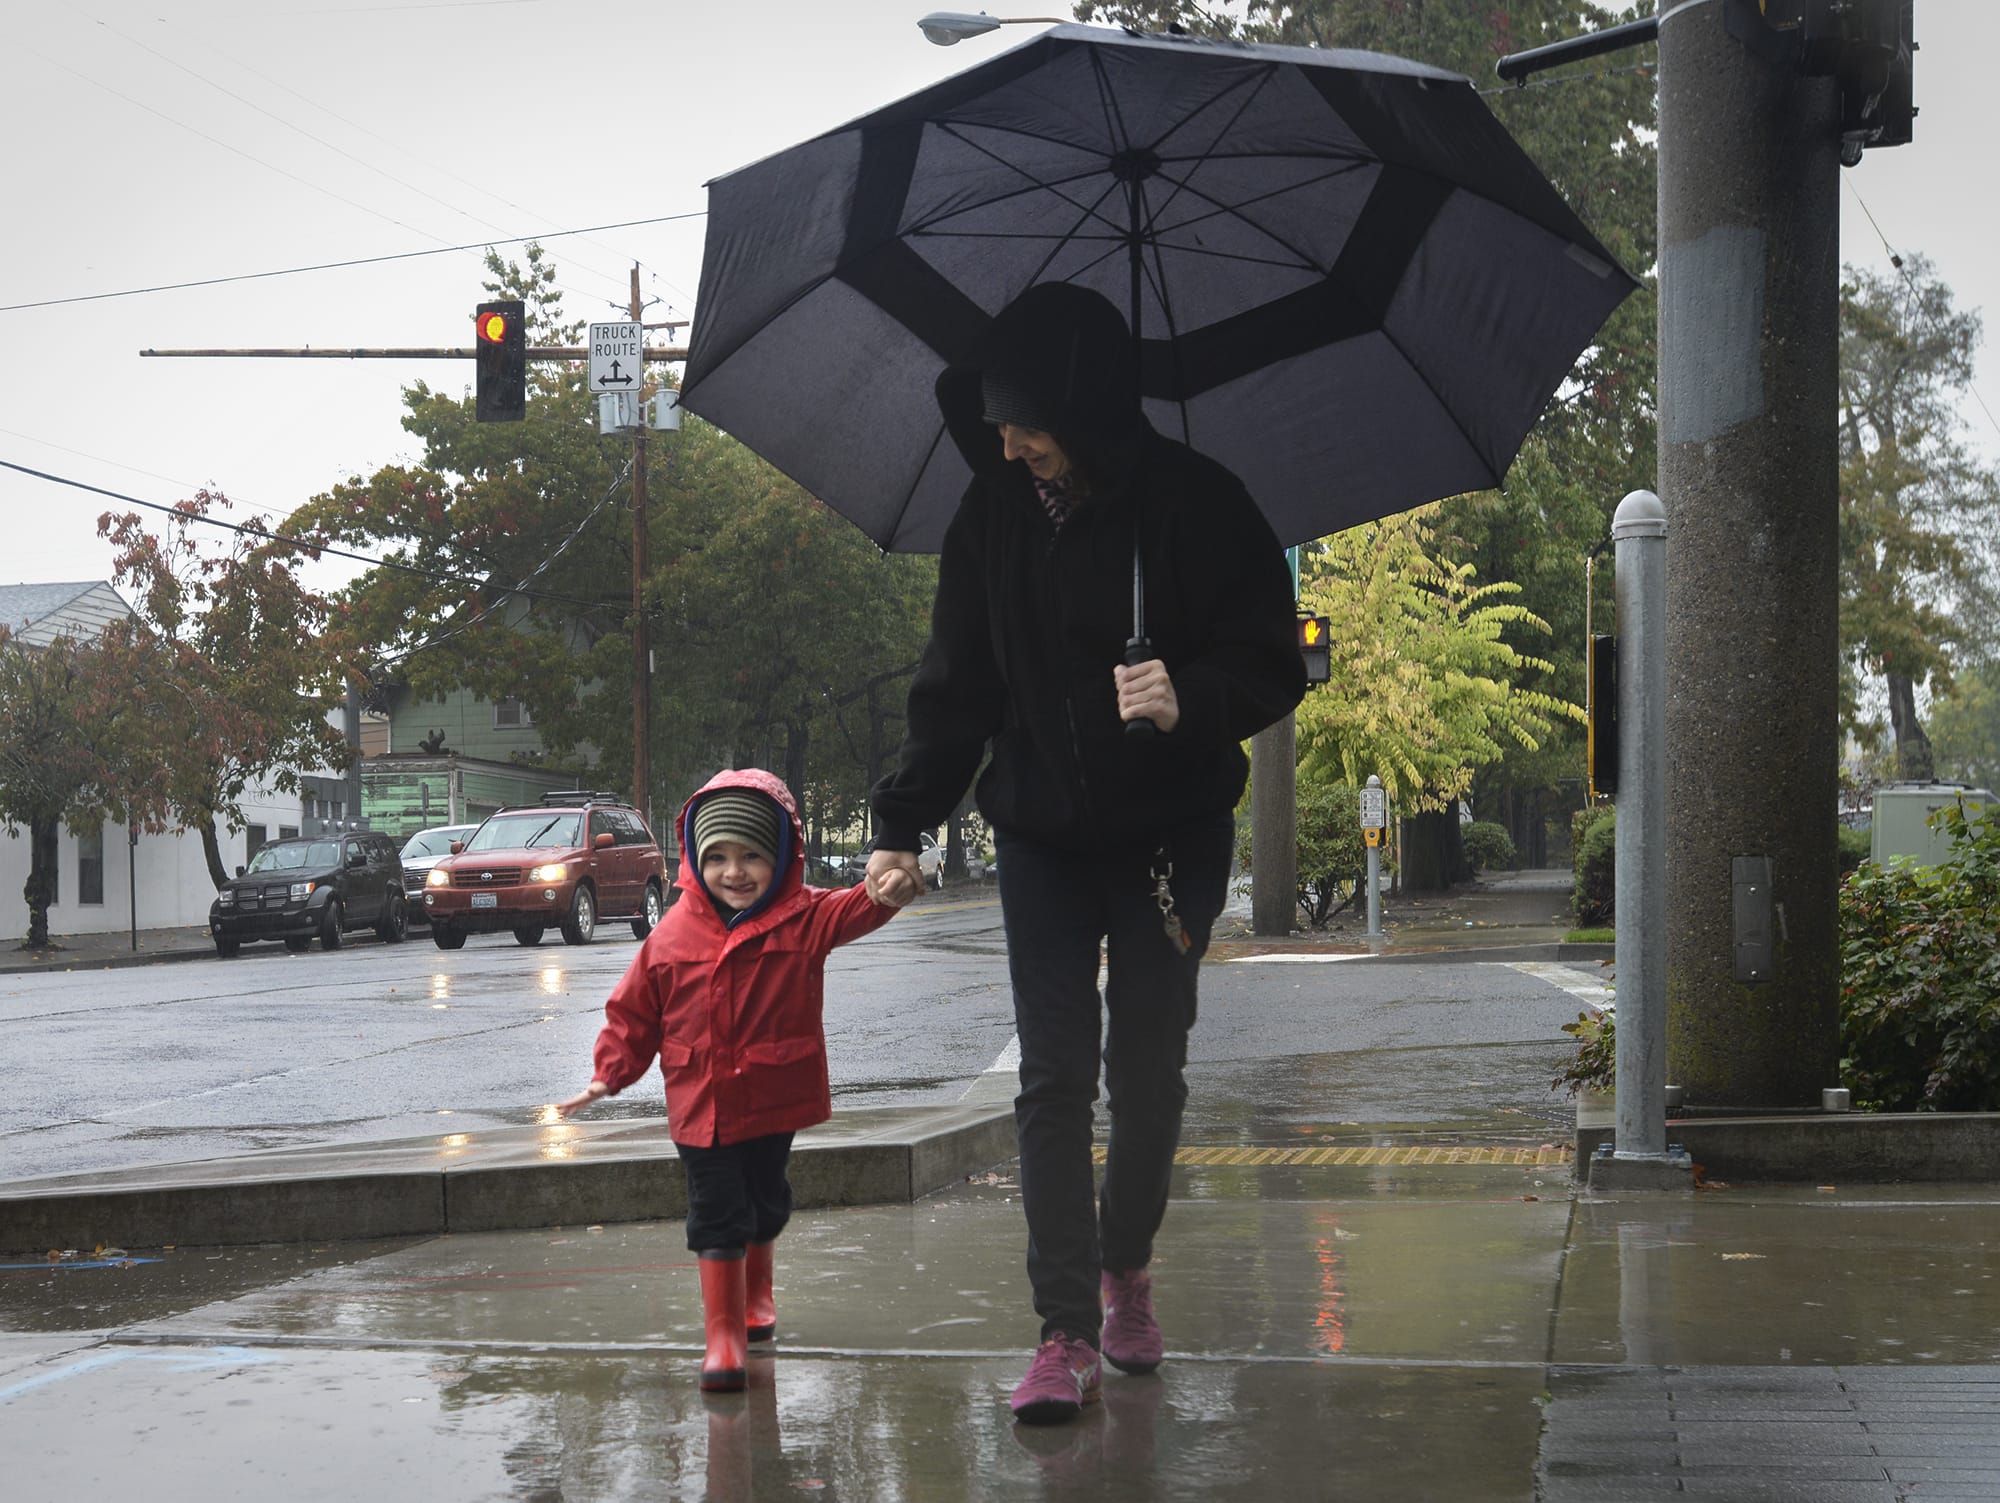 Ethan Parker, 3, and Suzanne Mark, right, try to keep dry while walking to the Vancouver Public Library in the rain on Thursday.